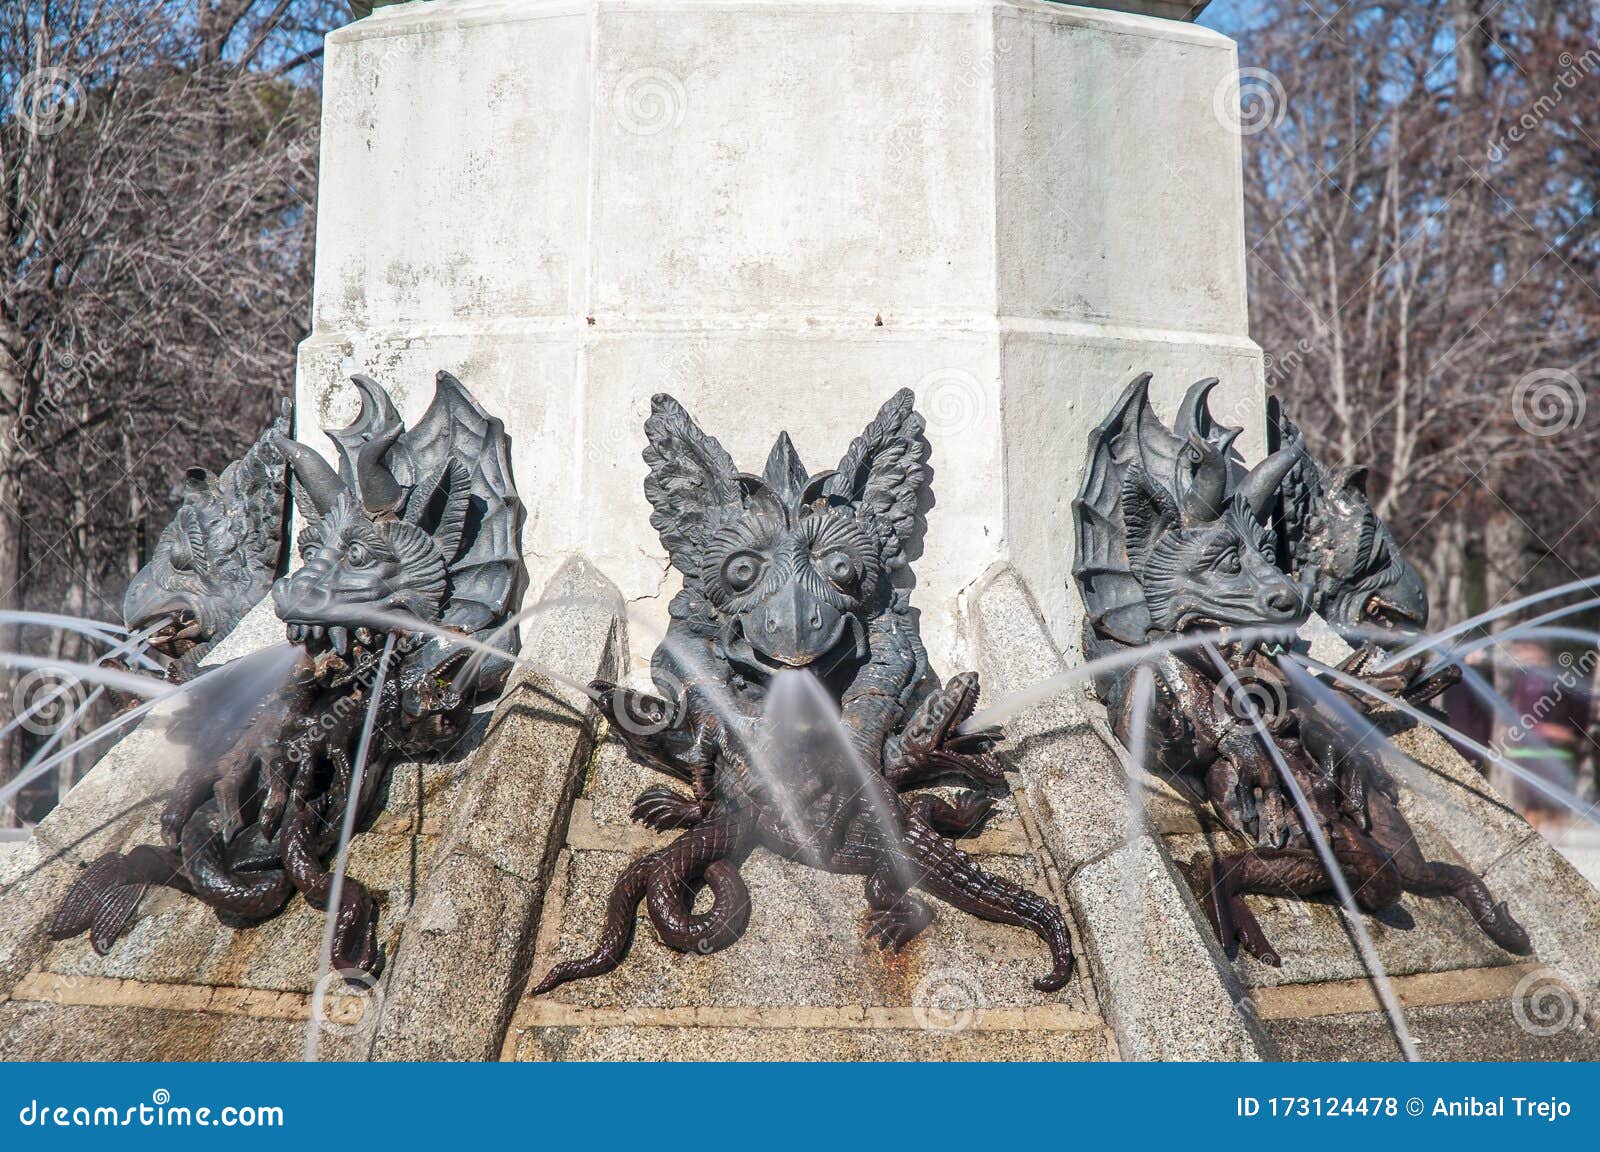 the fountain of the fallen angel in madrid, spain